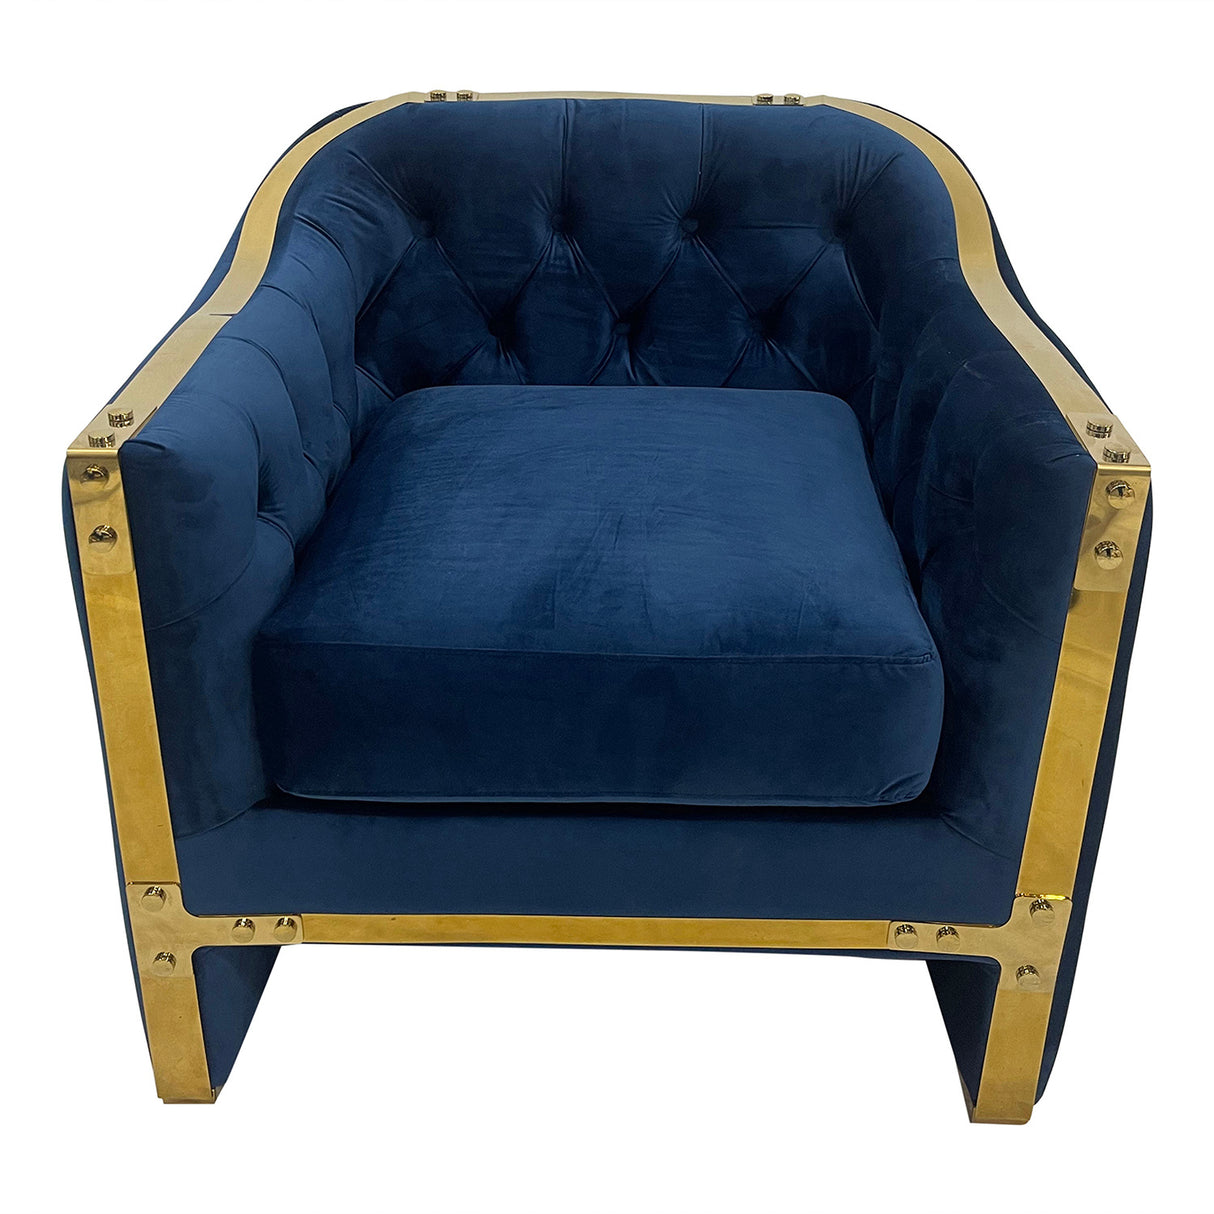 Navy and Gold Sofa Chair - Home Elegance USA